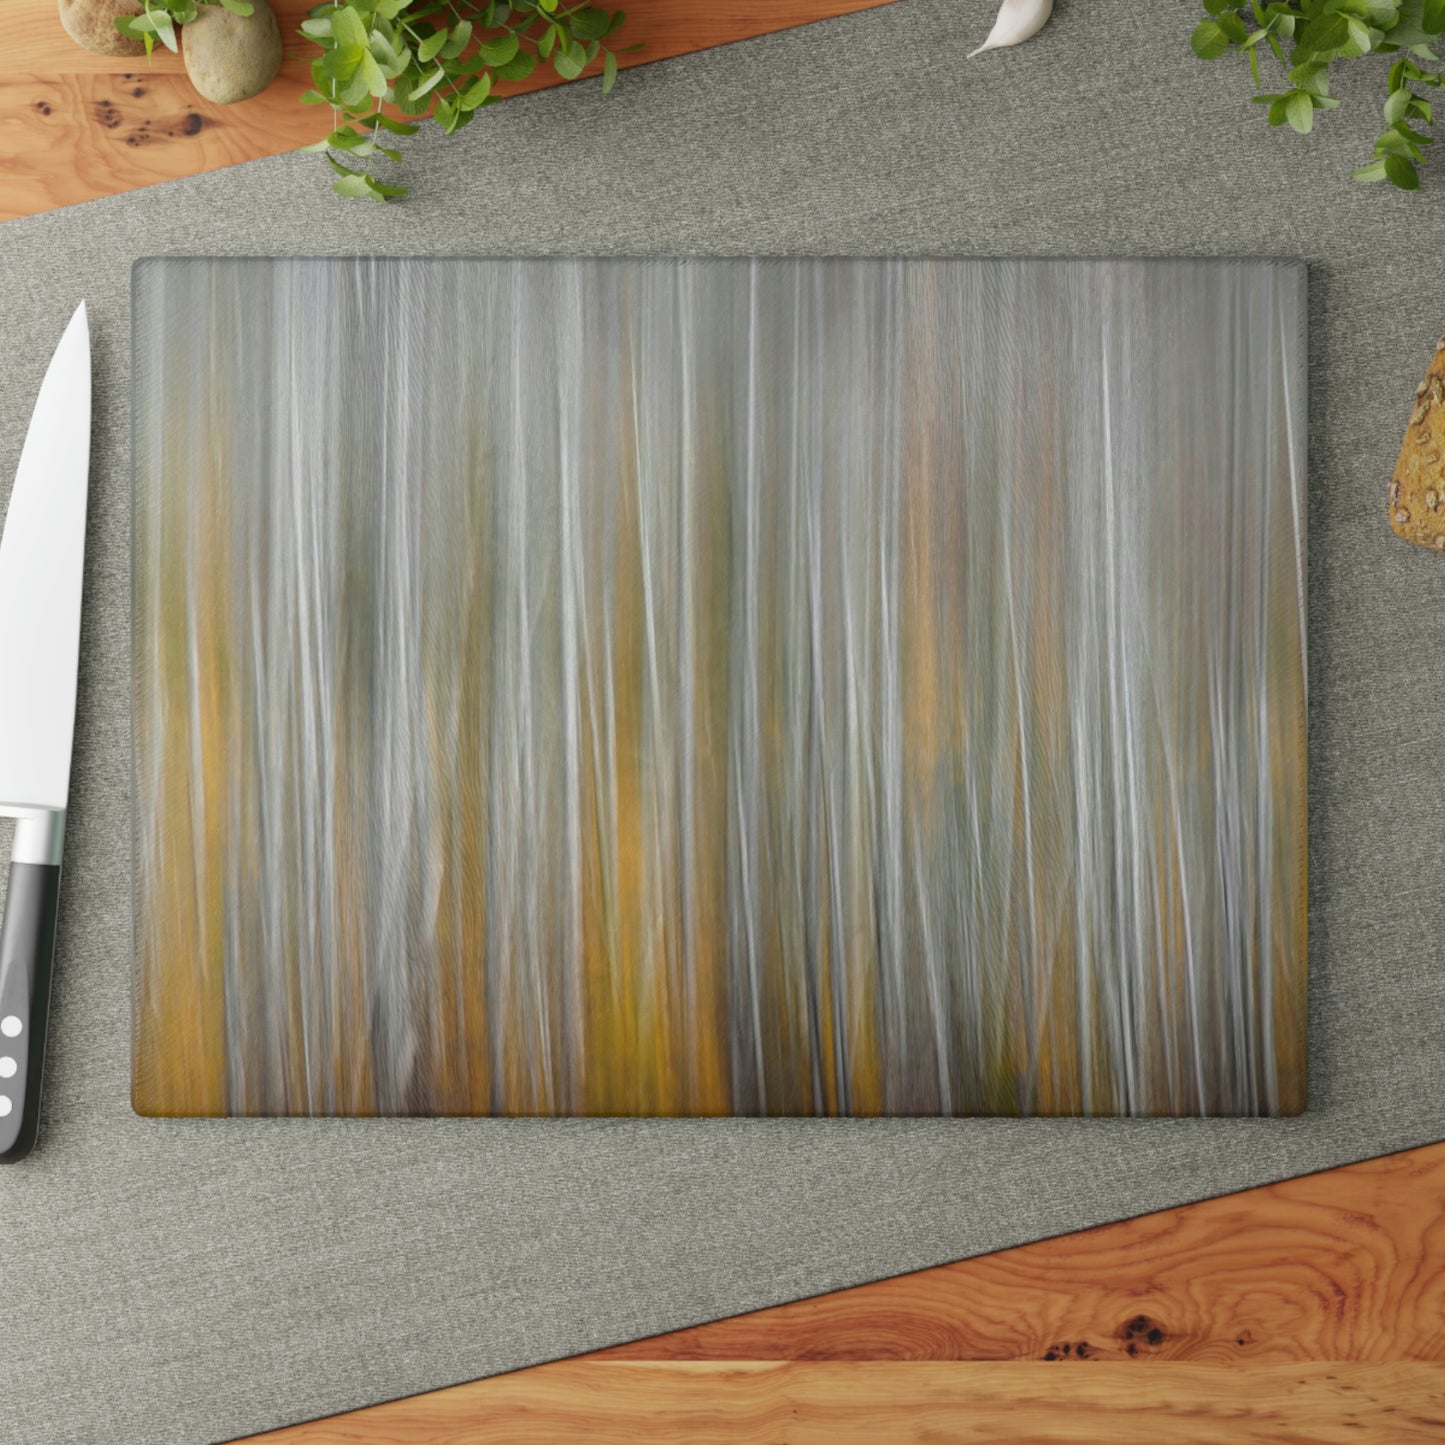 Glass Cutting Board - Abstract Autumn